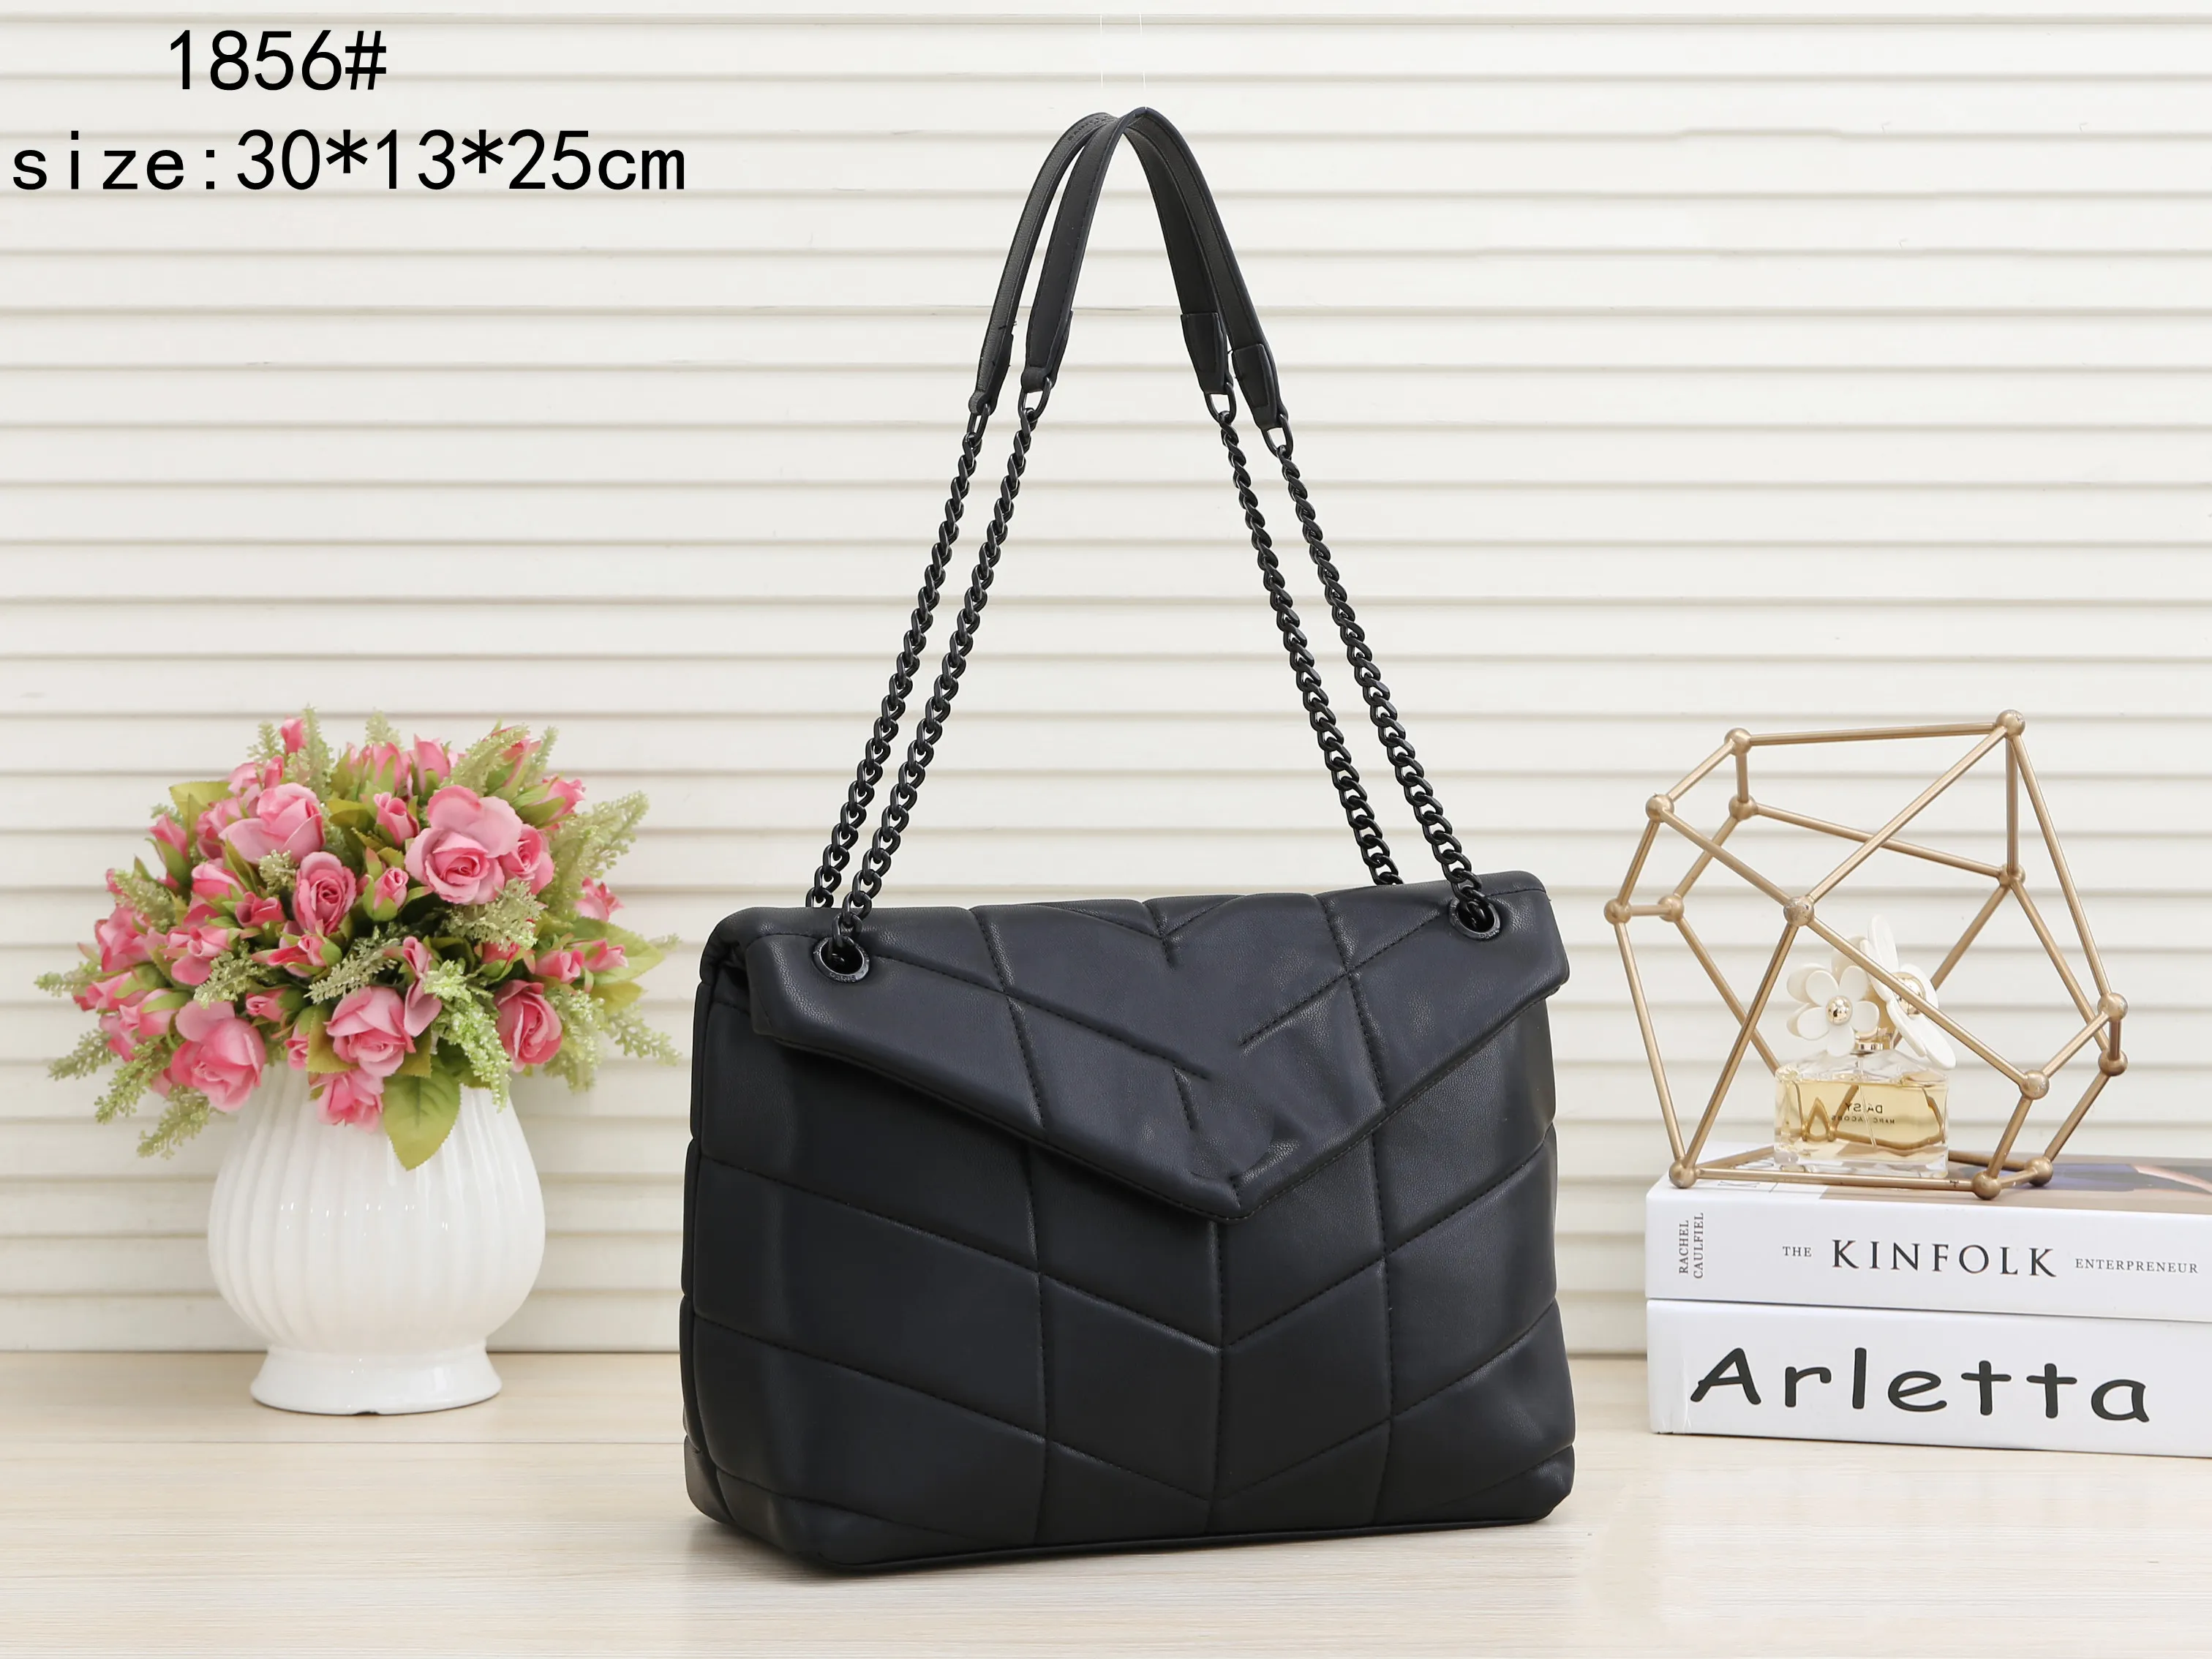 2021 new fashion handbag ladies designer composite bags lady clutch shoulder tote female purse high qulity PU leather metal chain Snakeskin and crocodile patterns